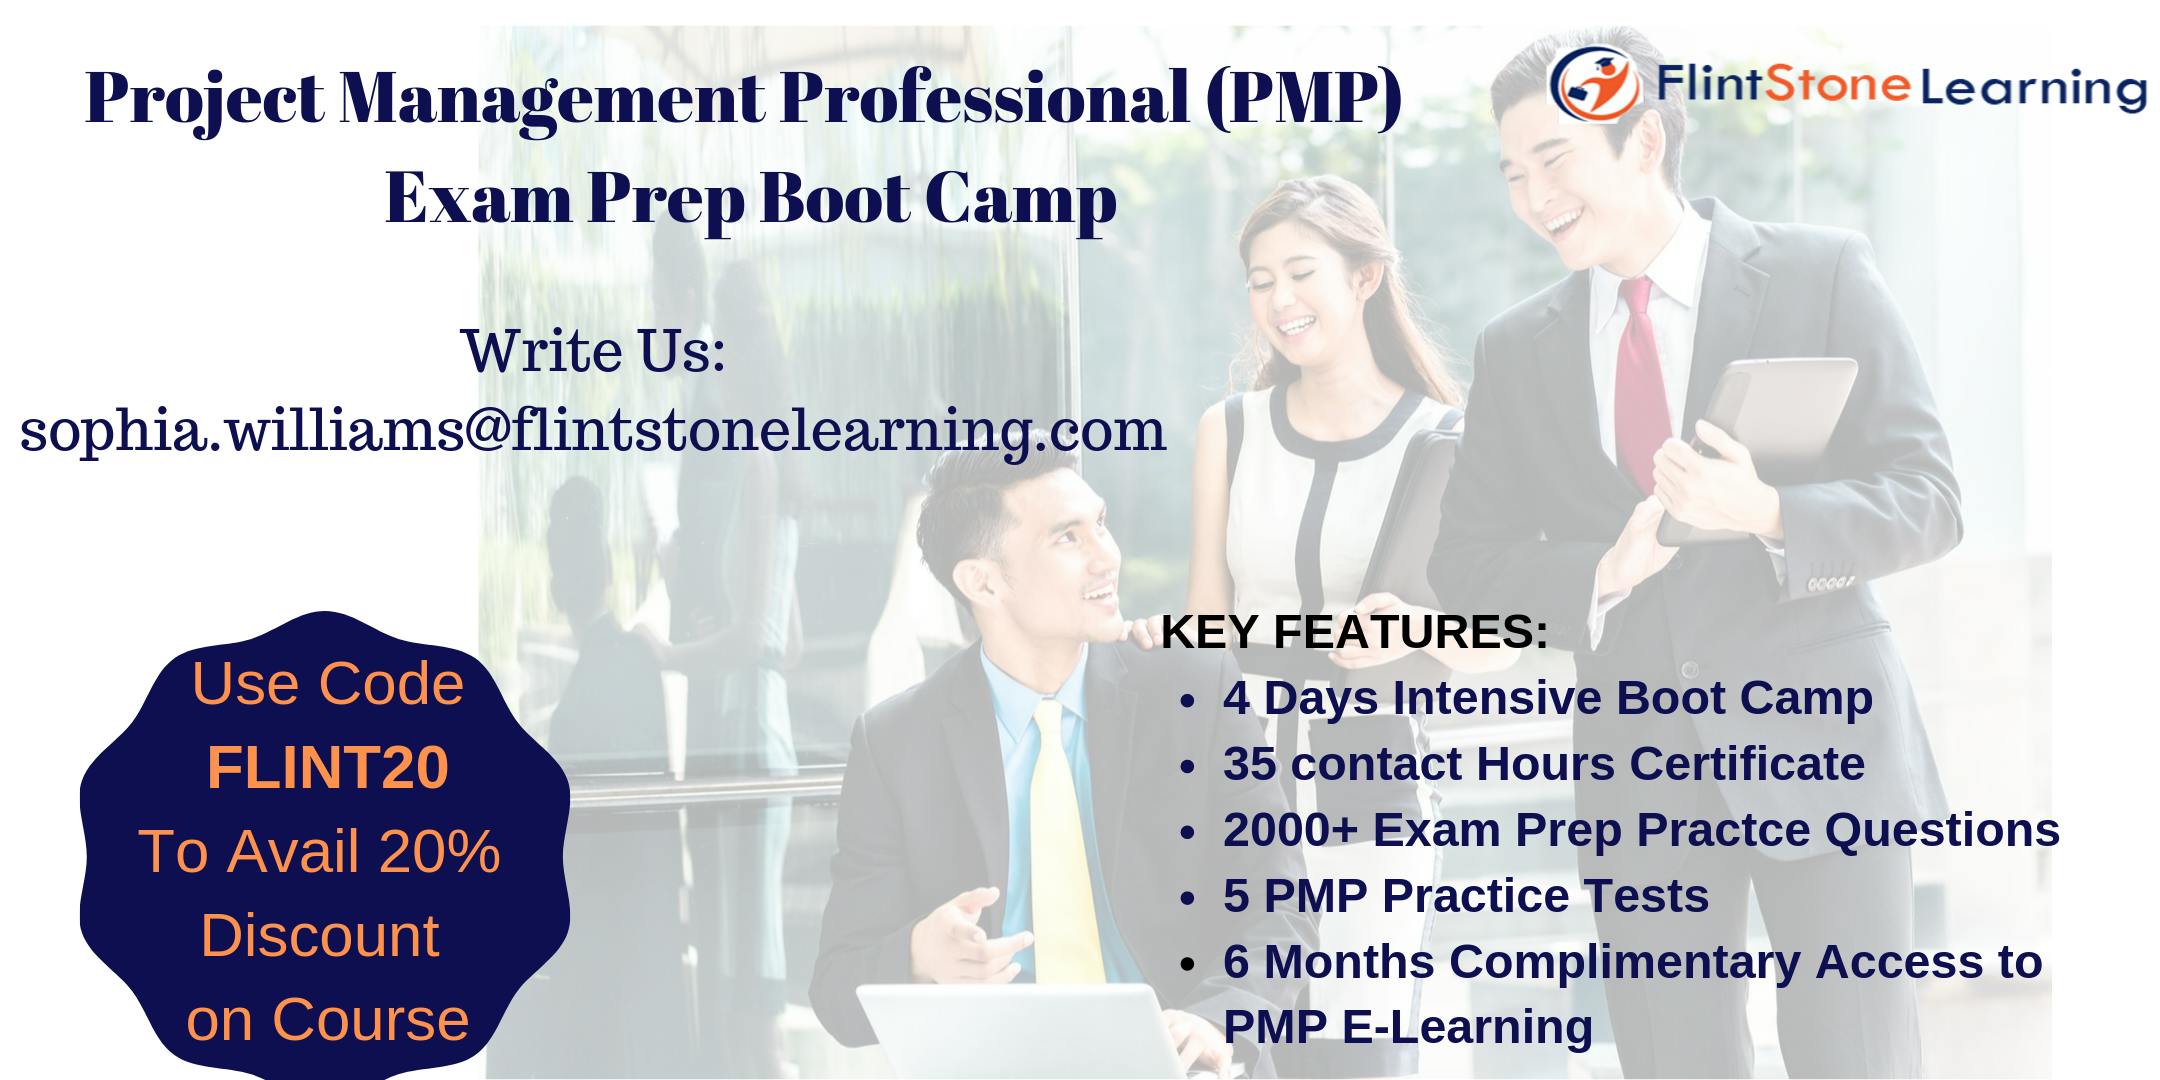 PMP training and credentials in four days in Rochester, NY